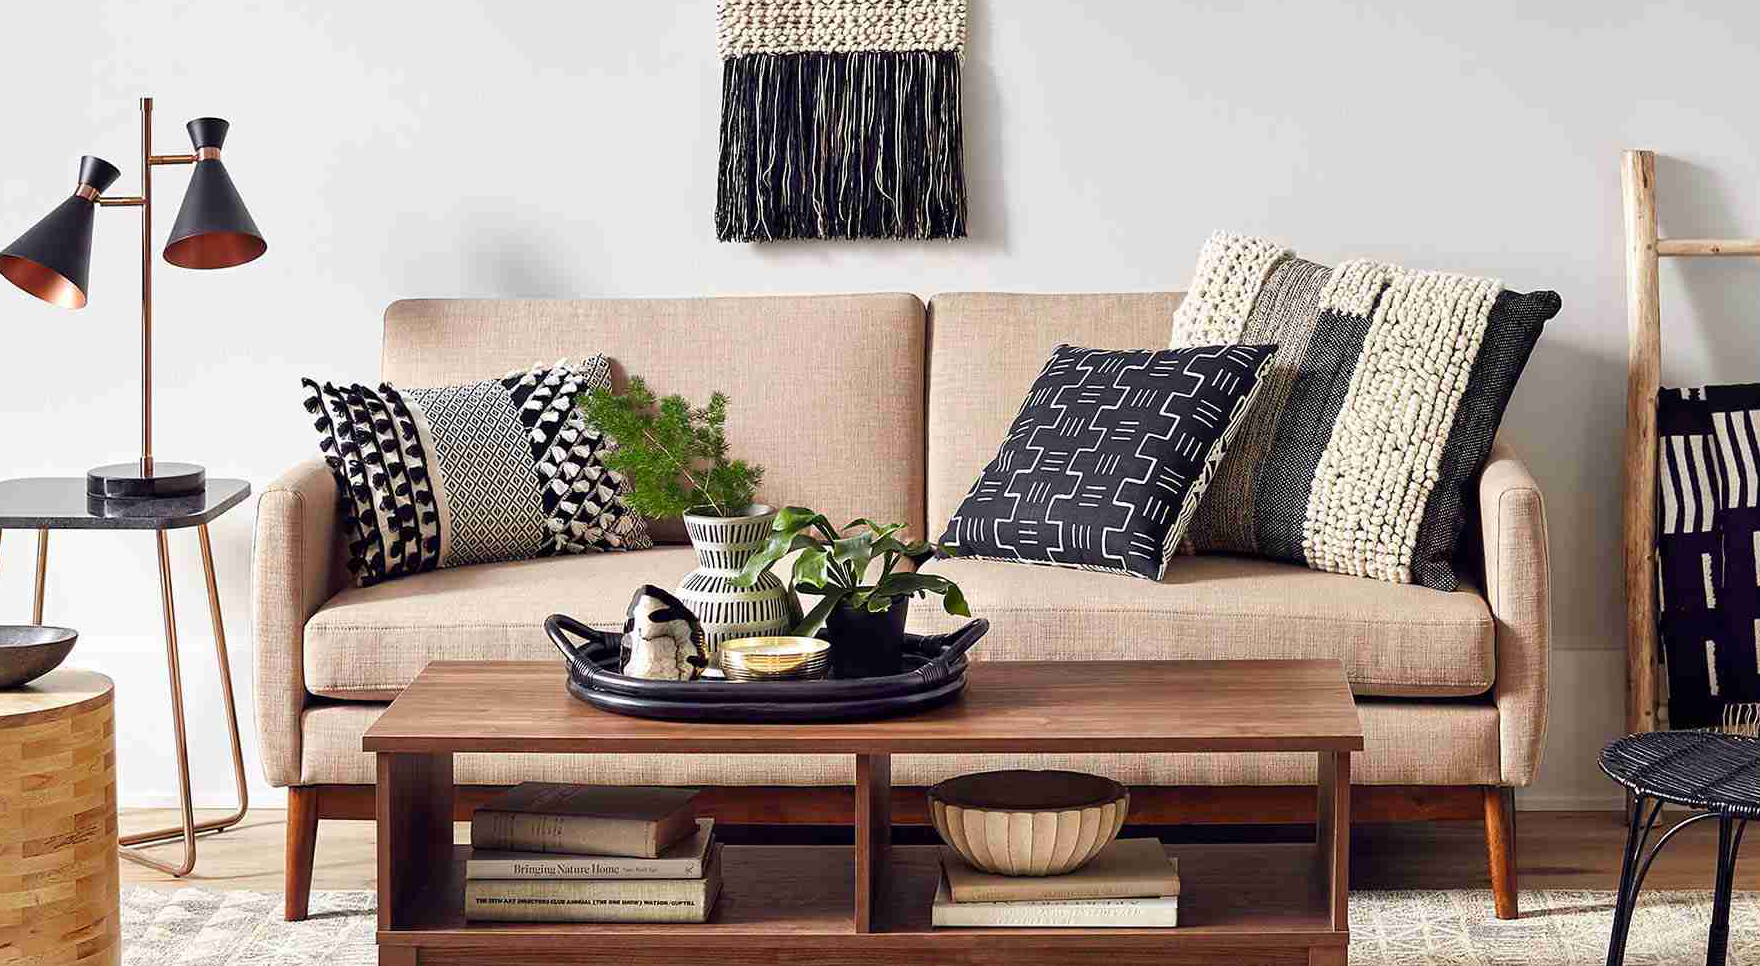 The Best Places to Get Affordable Home Decor